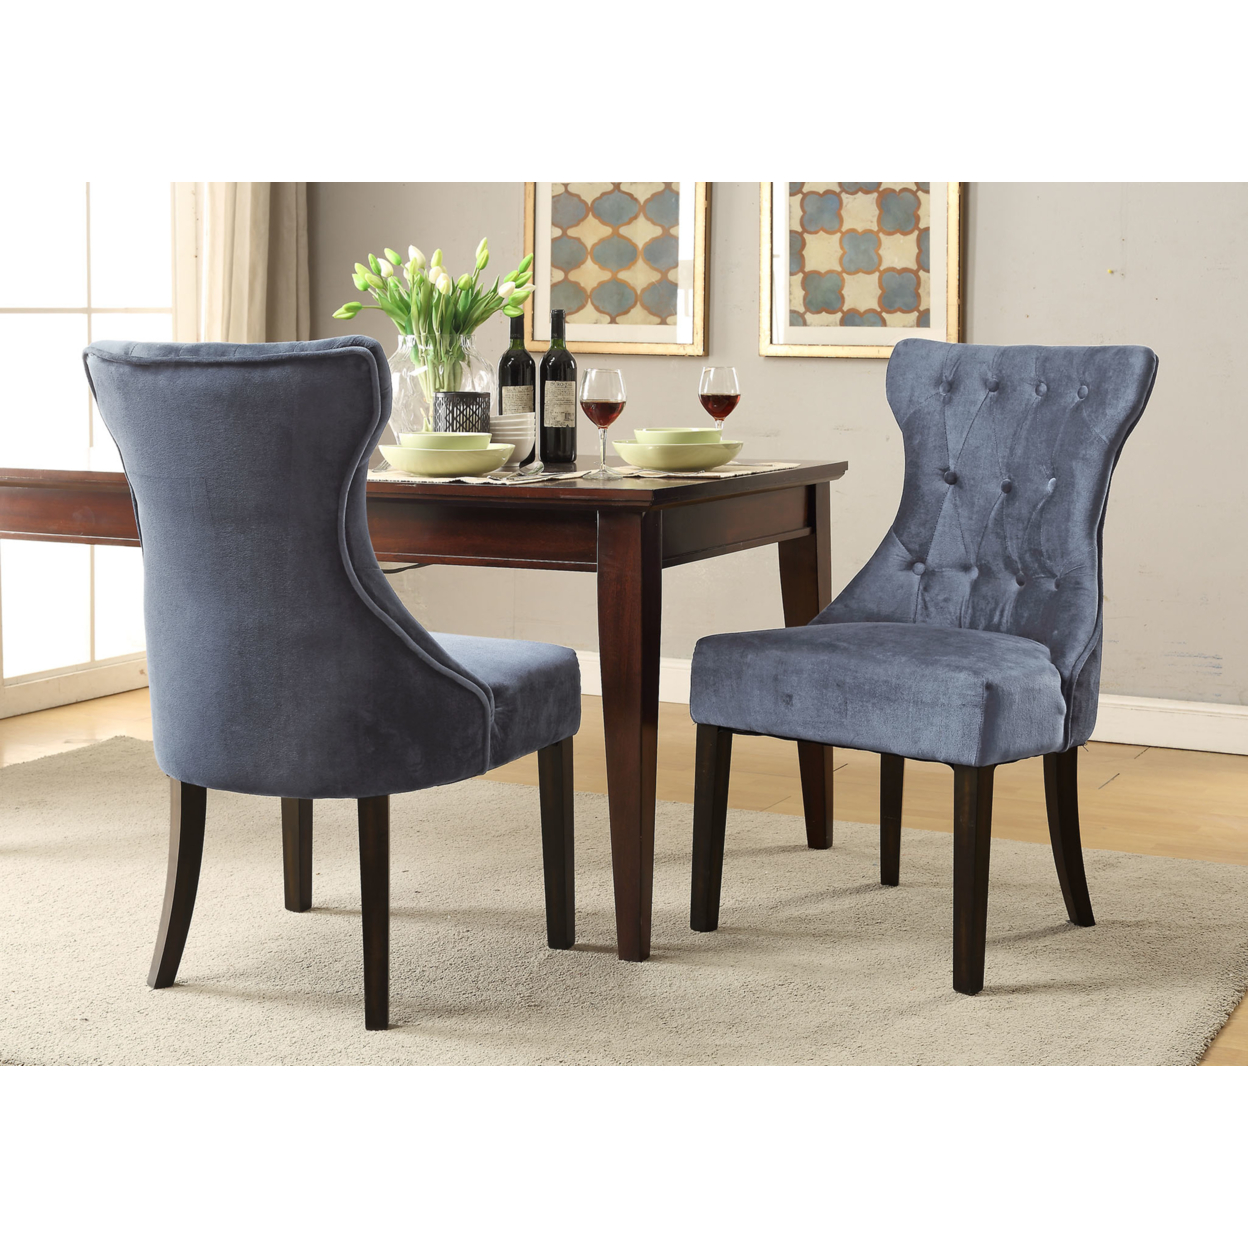 Doyle Velvet Button Tufted Tapered Rubberwood Legs Dining Chair, Set Of 2 - Grey